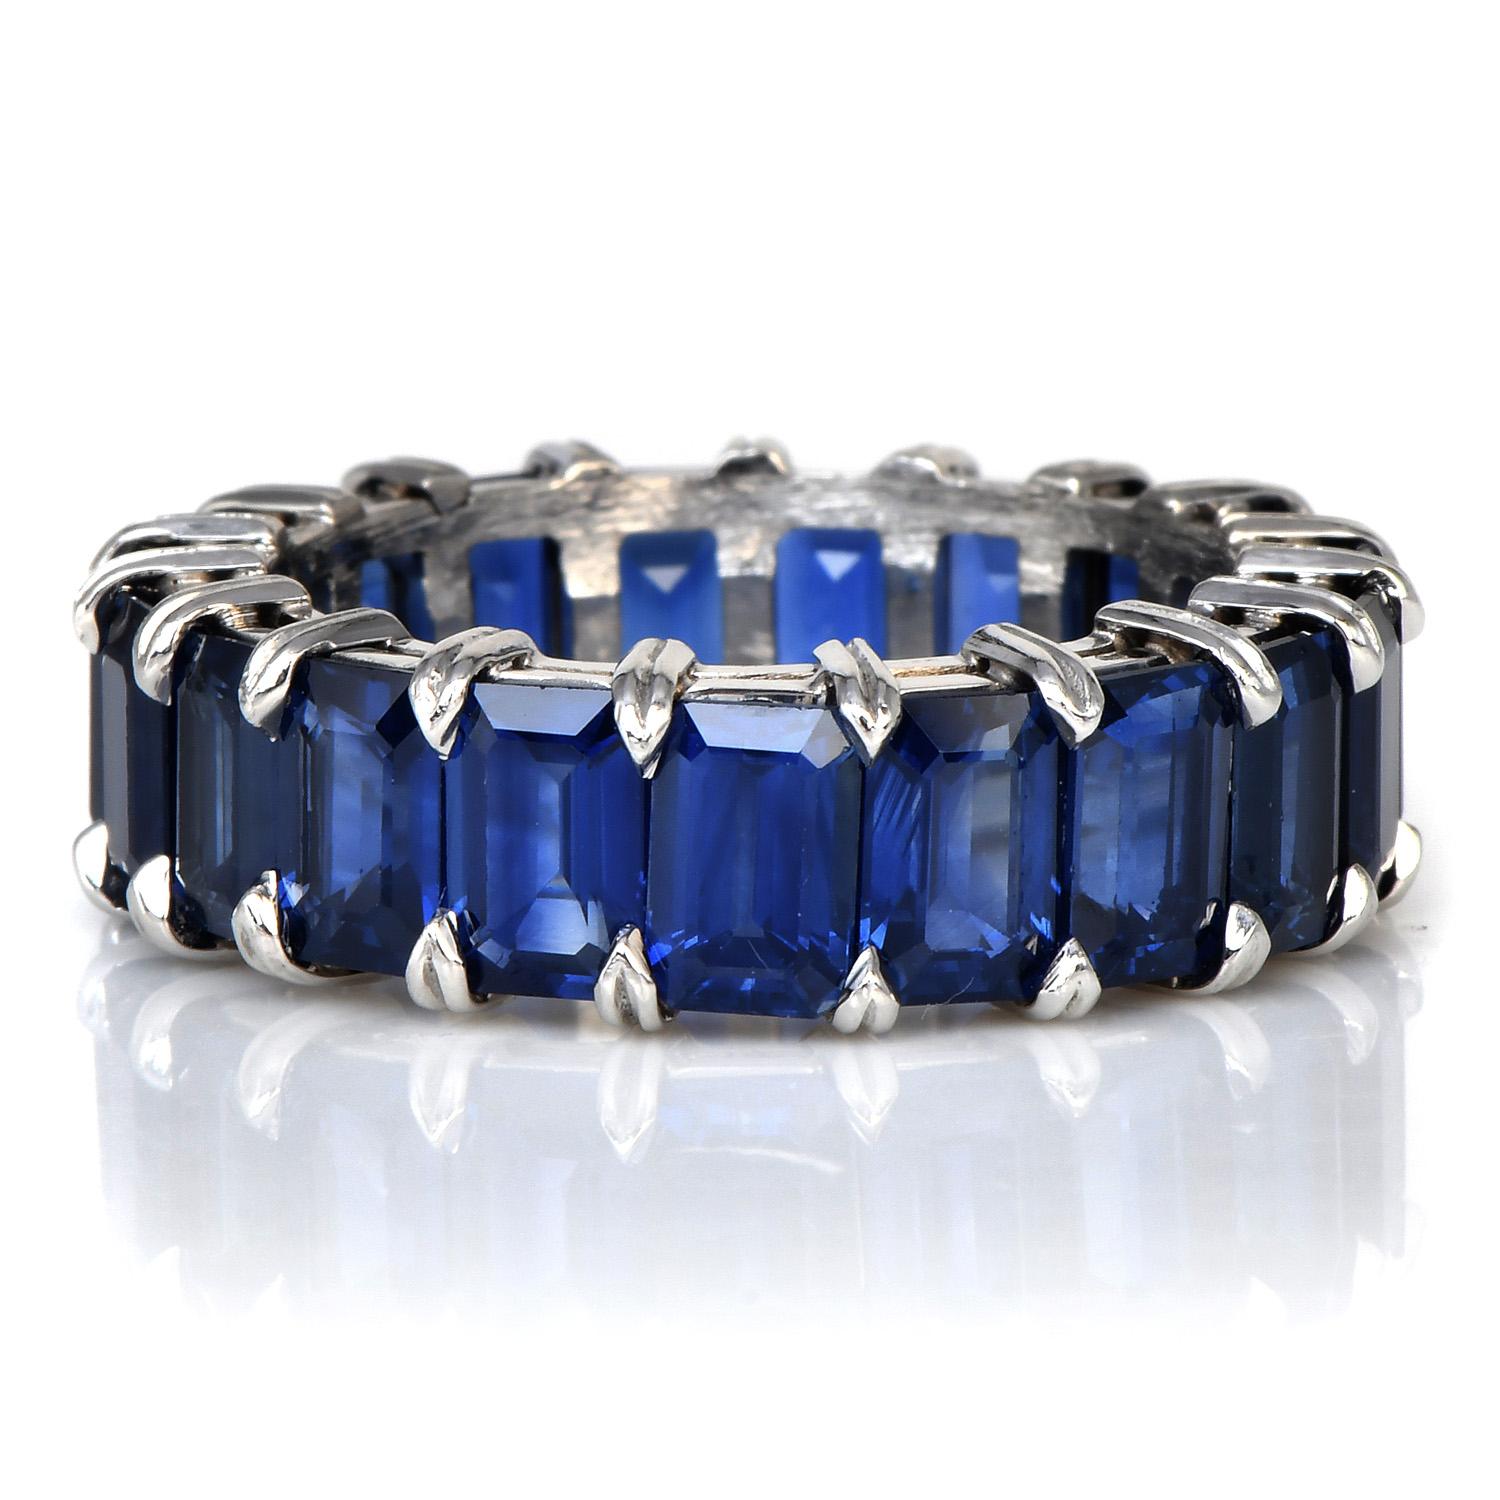 An Endless Ring of Inspiration, Tranquility & Freedom!

Blue has been for ages the color of royalty, and this exquisite sapphire ring has all the importance and beauty.

This classic style eternity band ring contains 20

beautifully matched